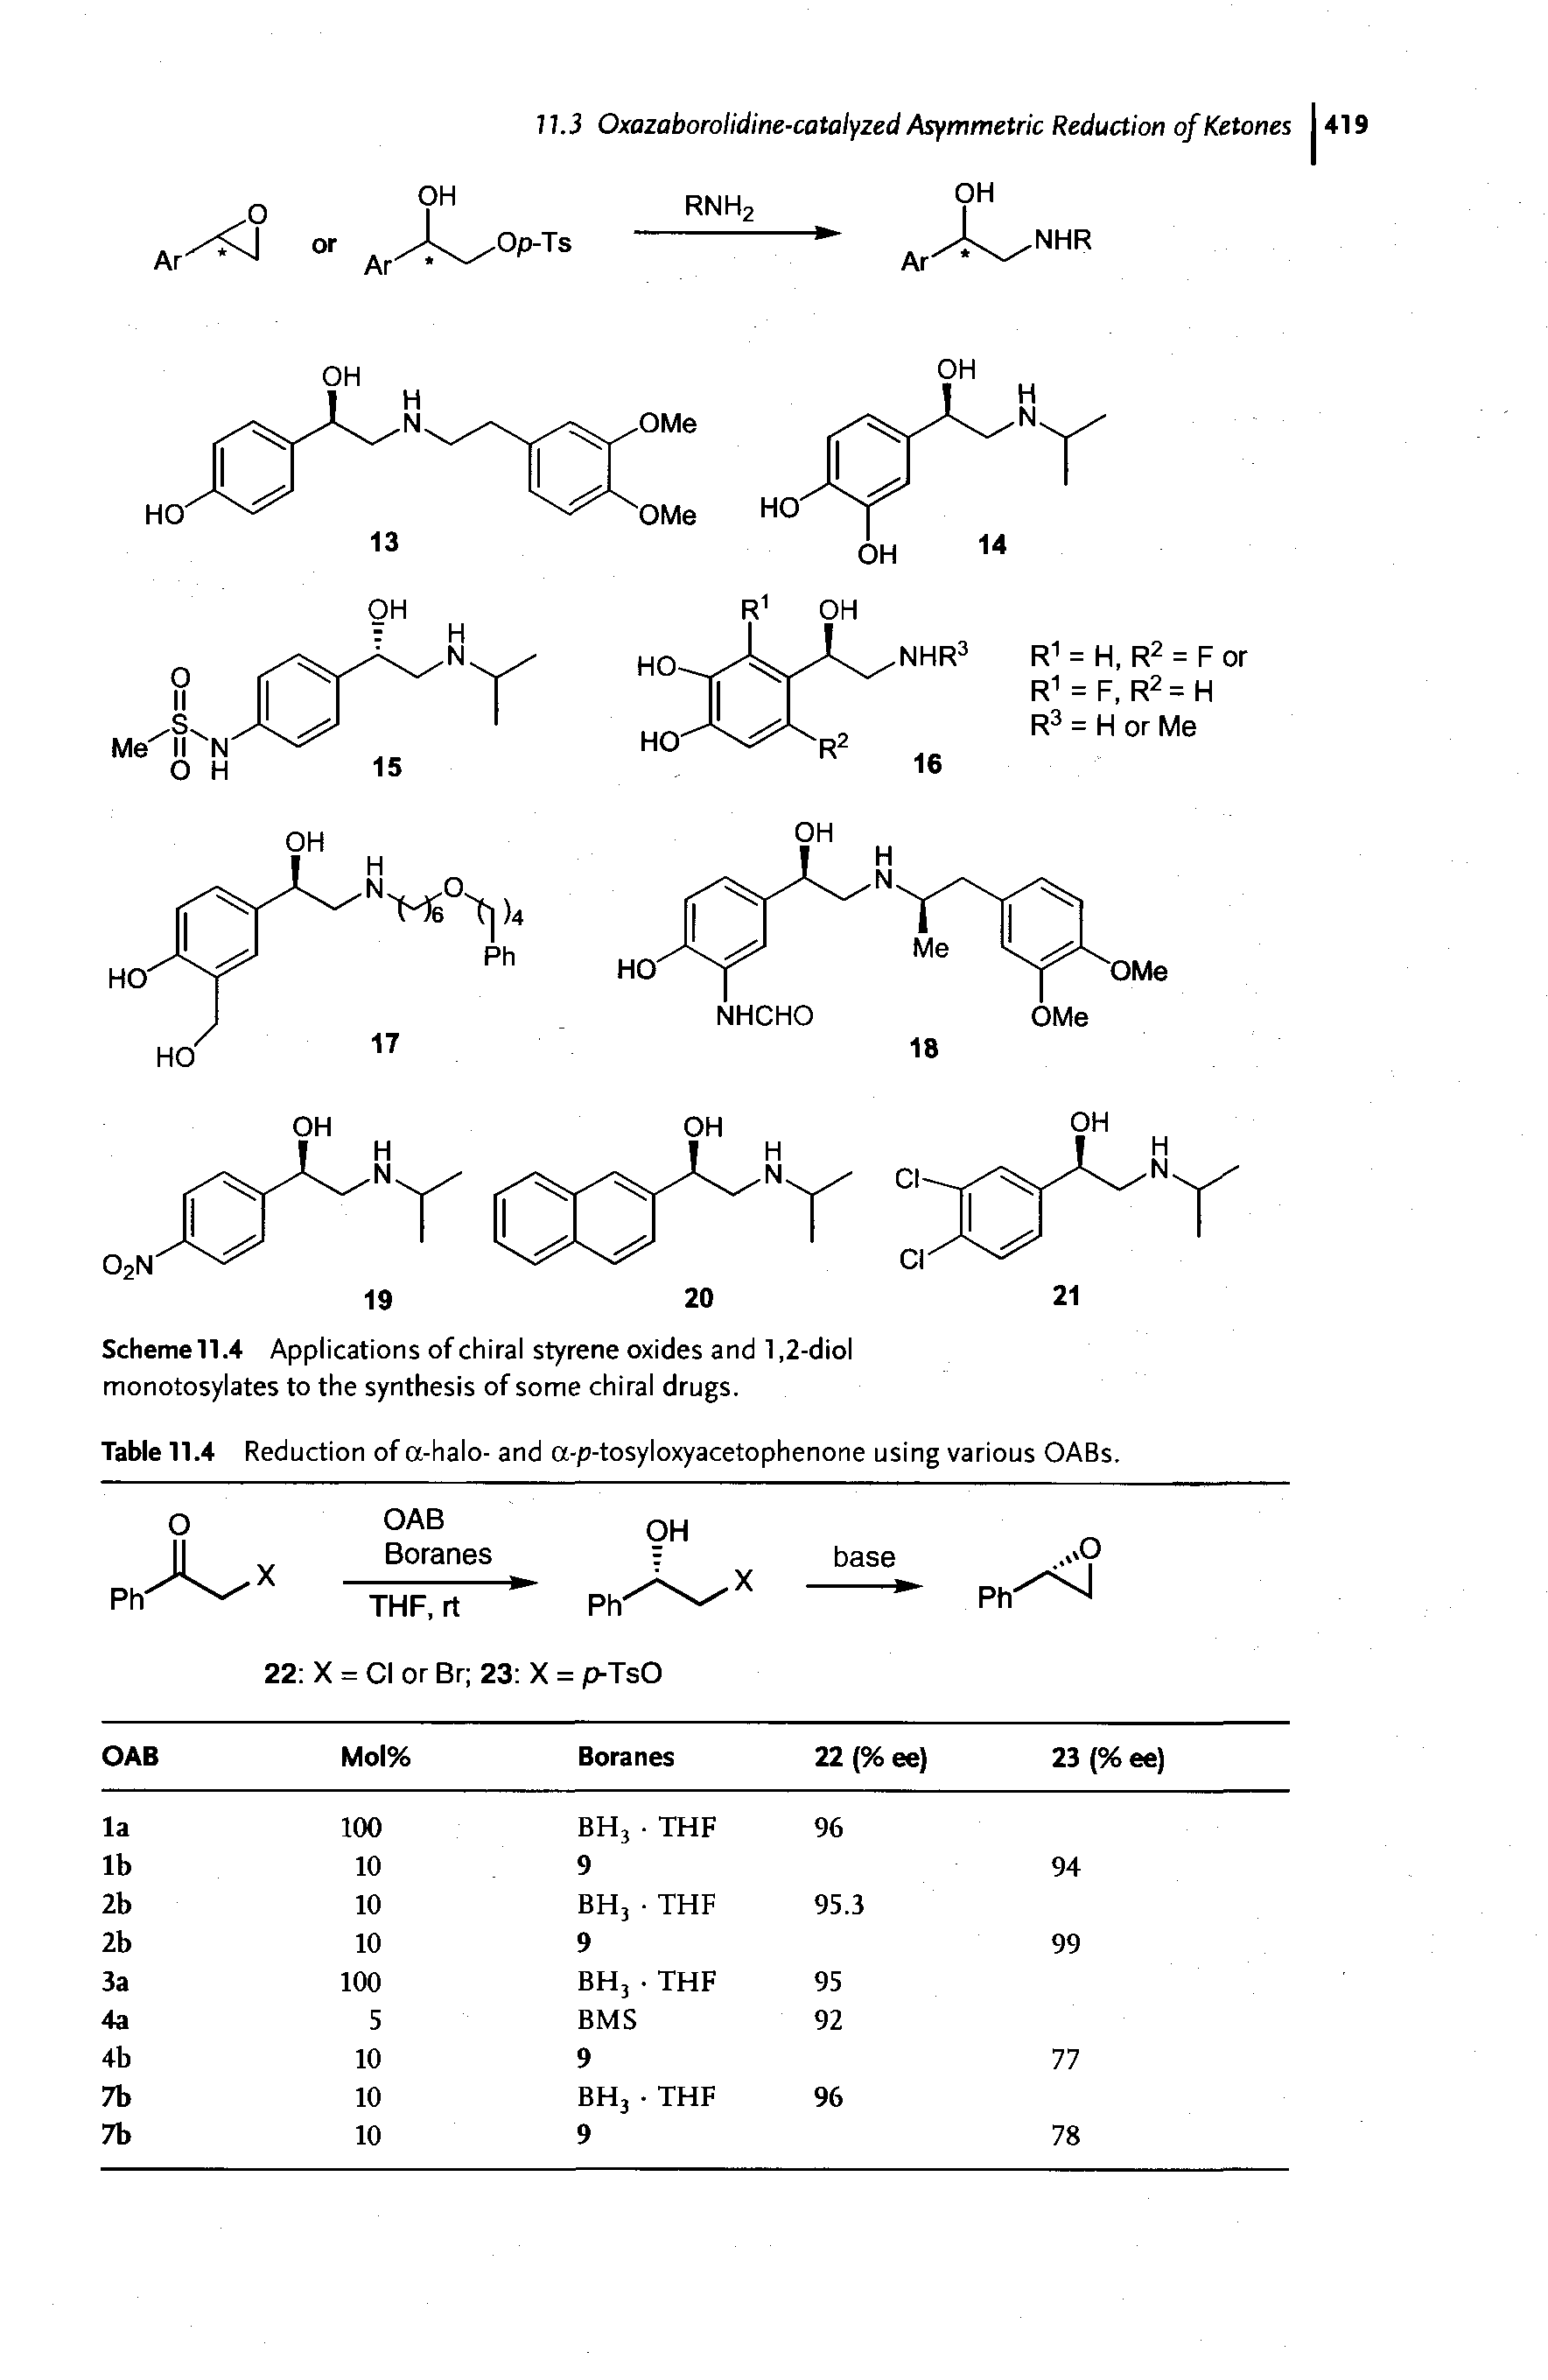 Scheme11.4 Applications of chiral styrene oxides and 1,2-diol monotosylates to the synthesis of some chiral drugs.